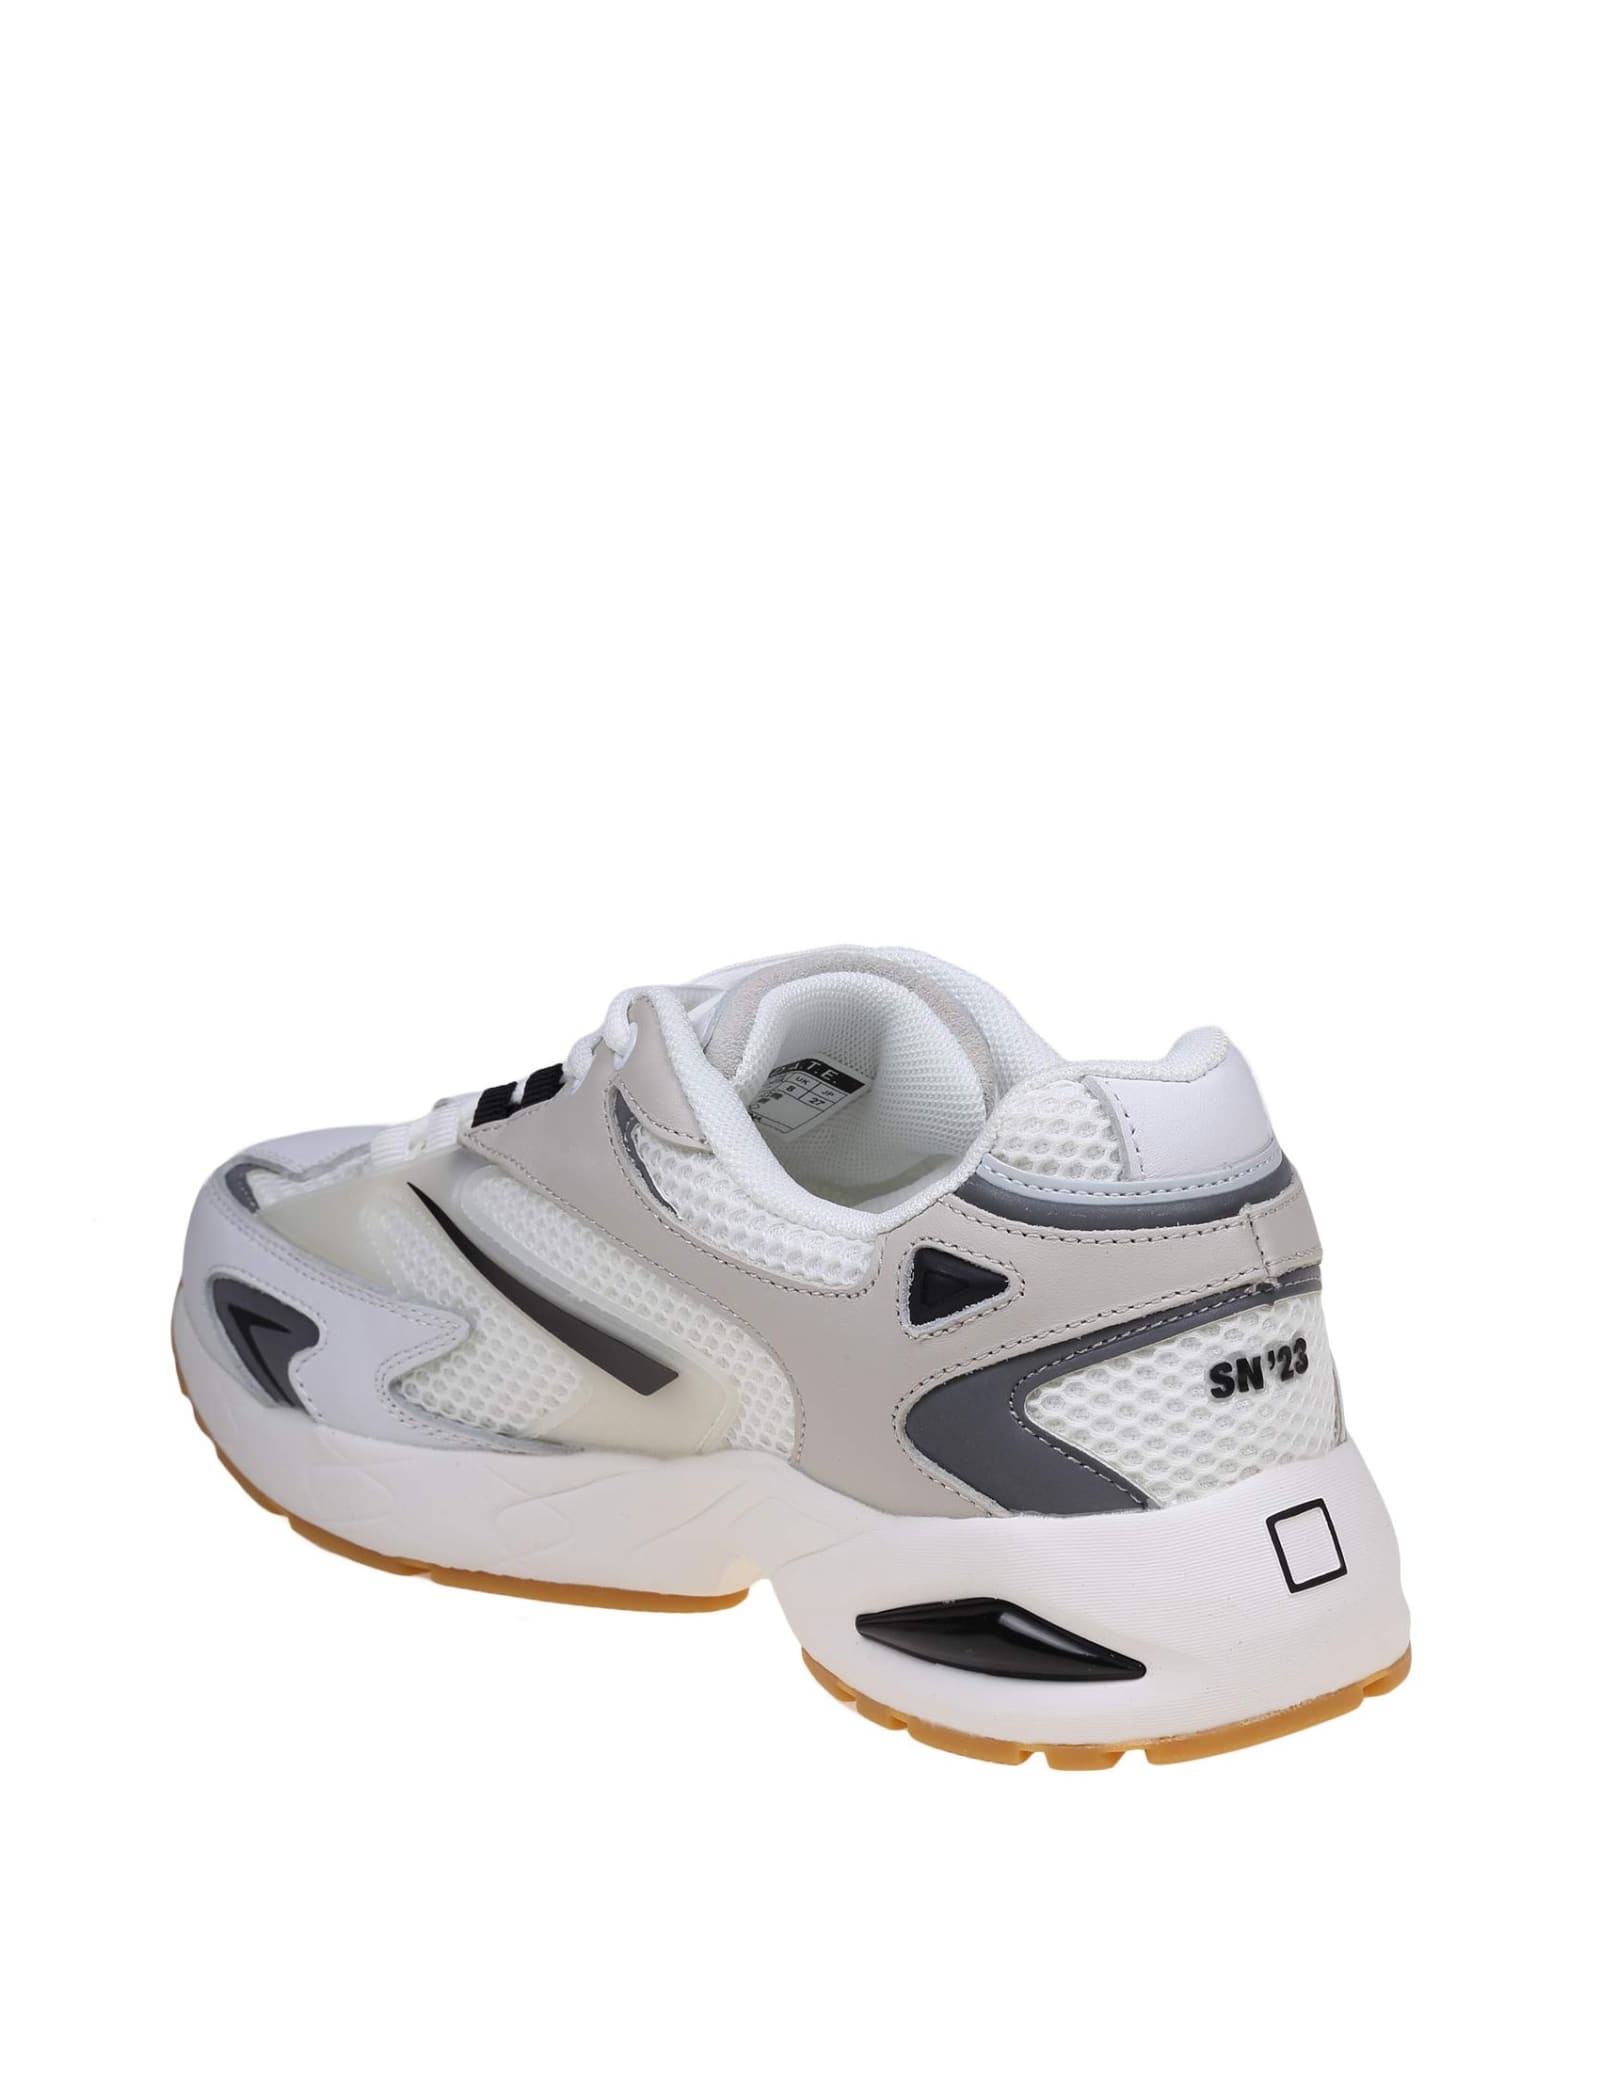 Shop Date Sn23 Sneakers In White/grey Mesh And Leather